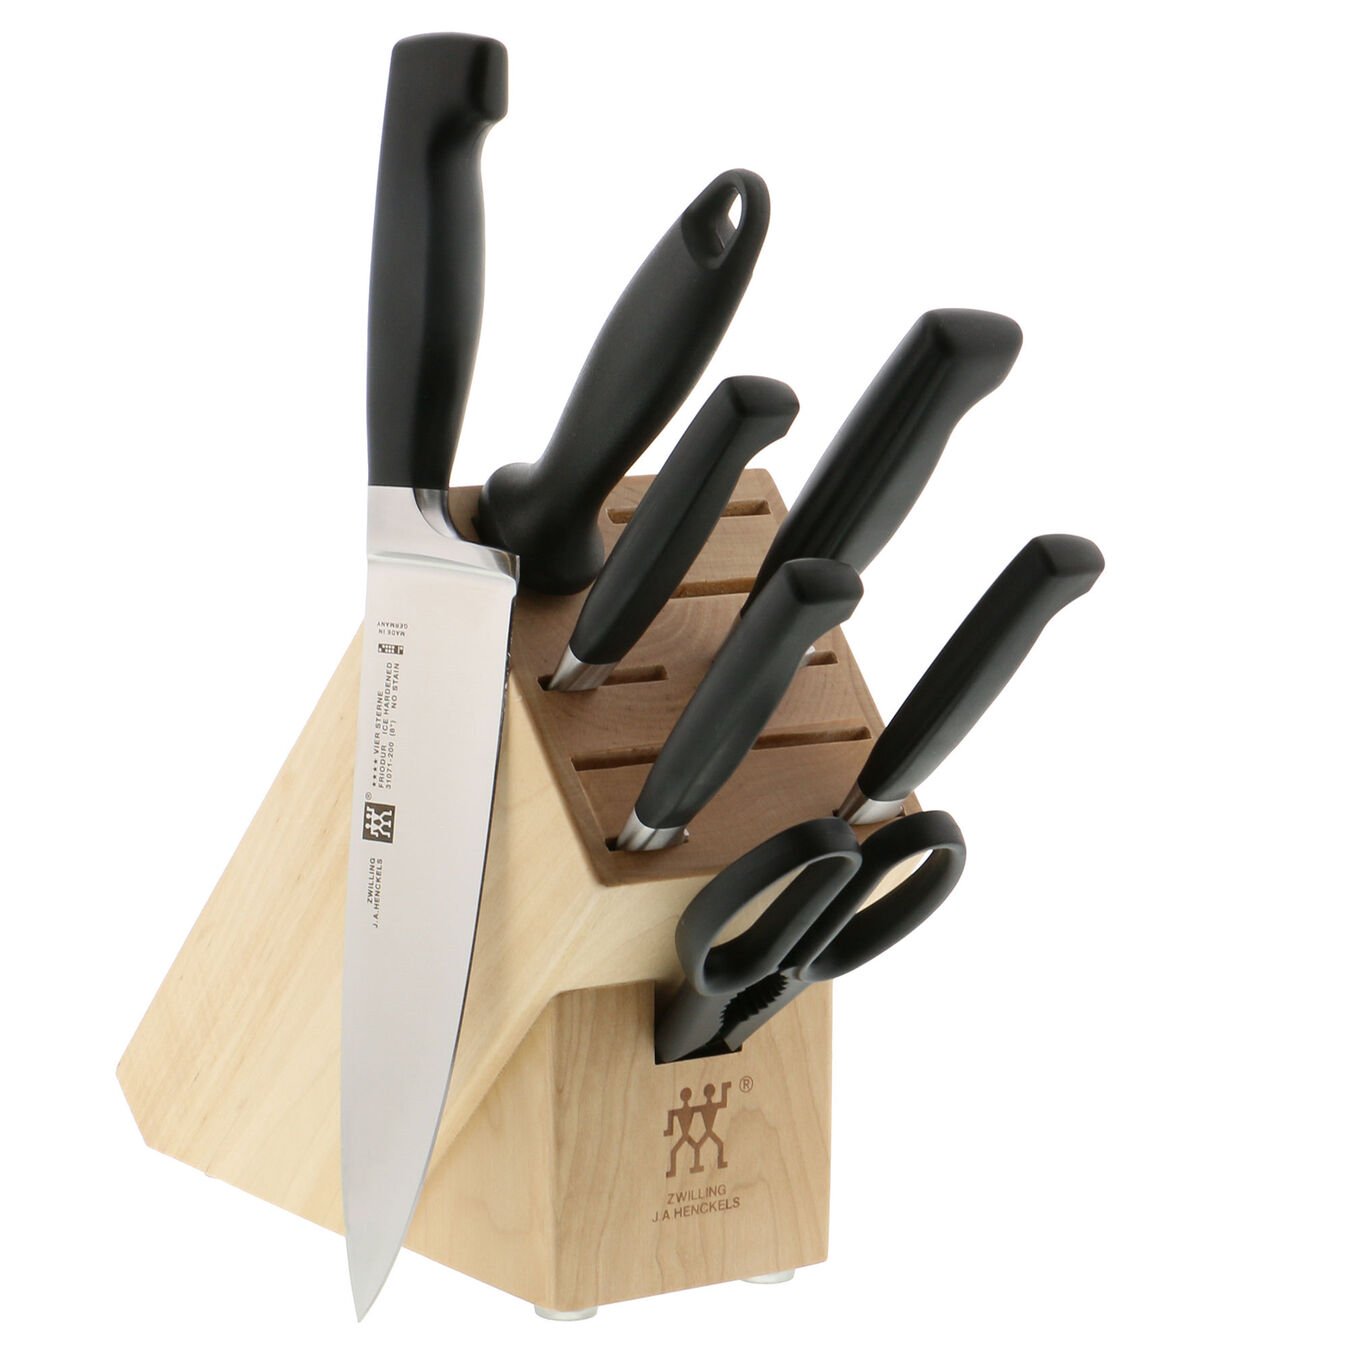 wooden knife block filled with knives and one knife outside block on white background